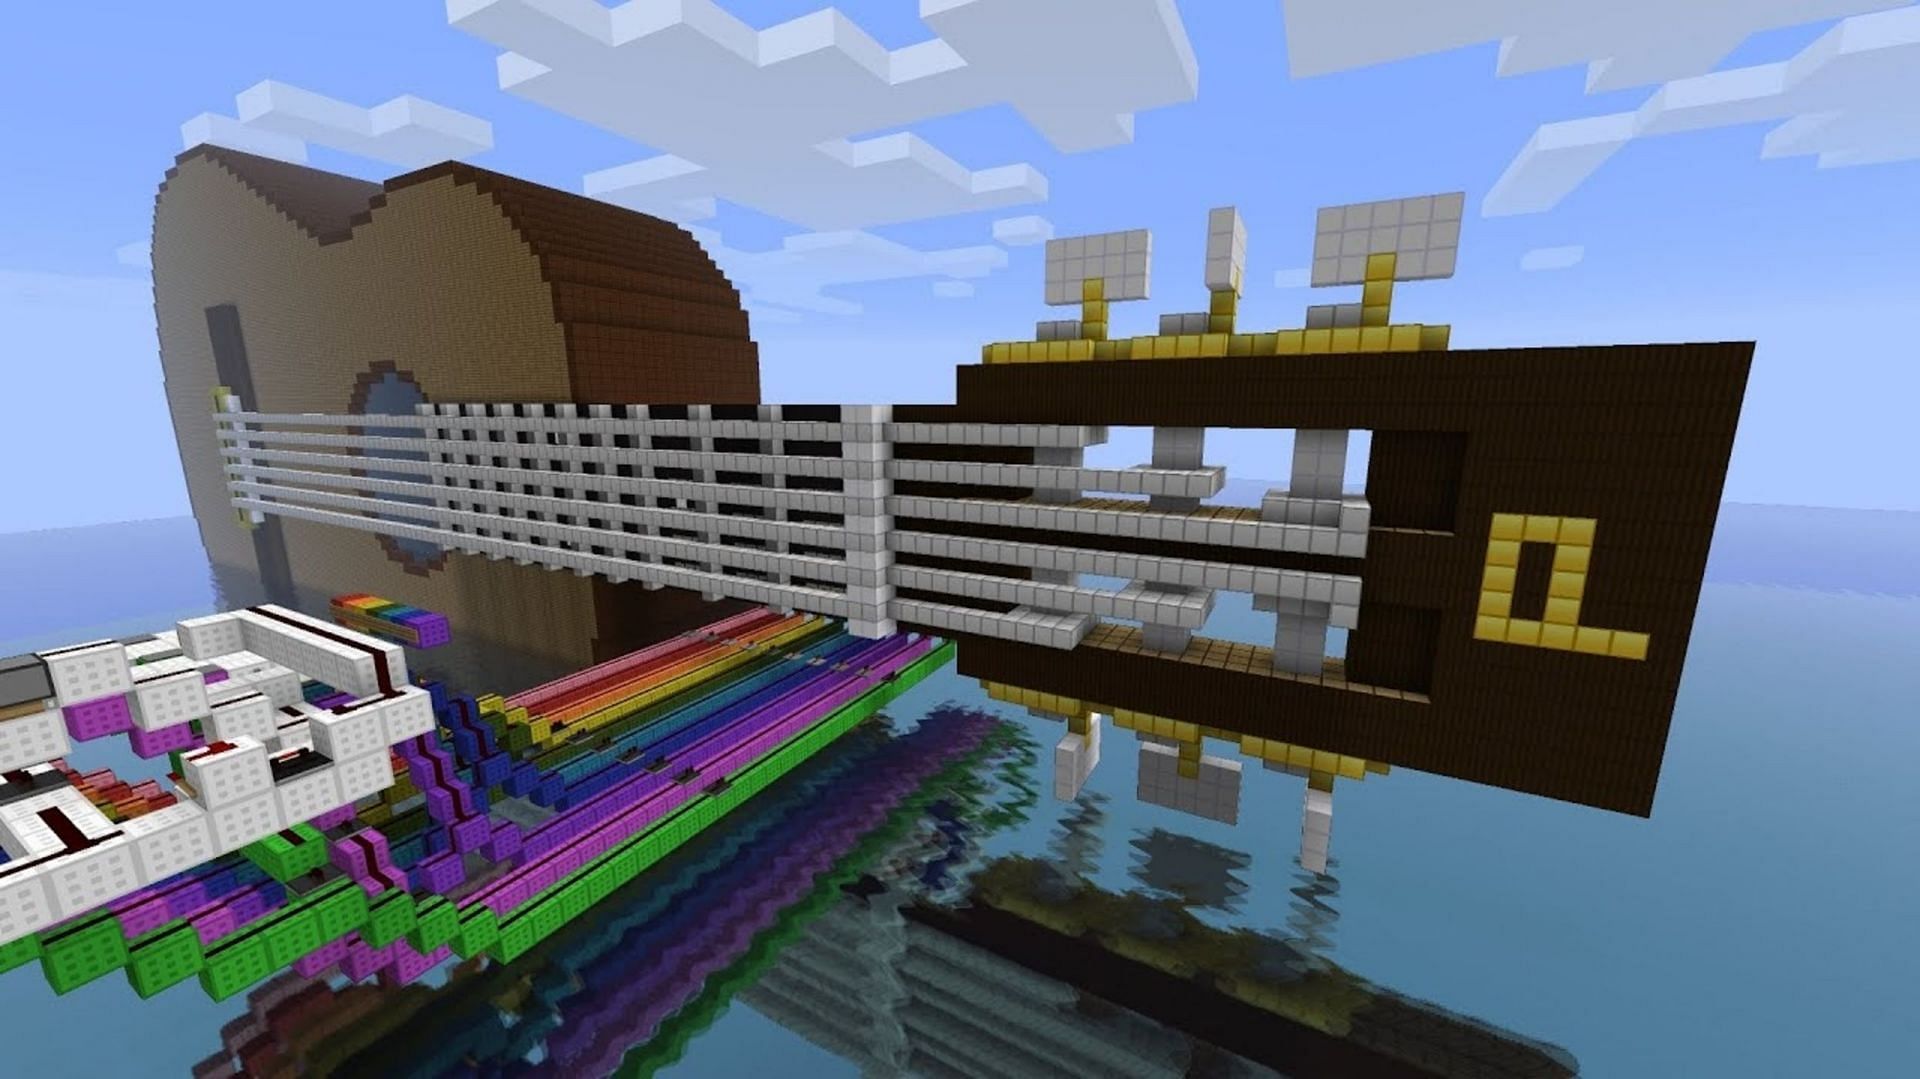 This redstone build allows players to create as much as they entertain (Image via FVDisco/YouTube)